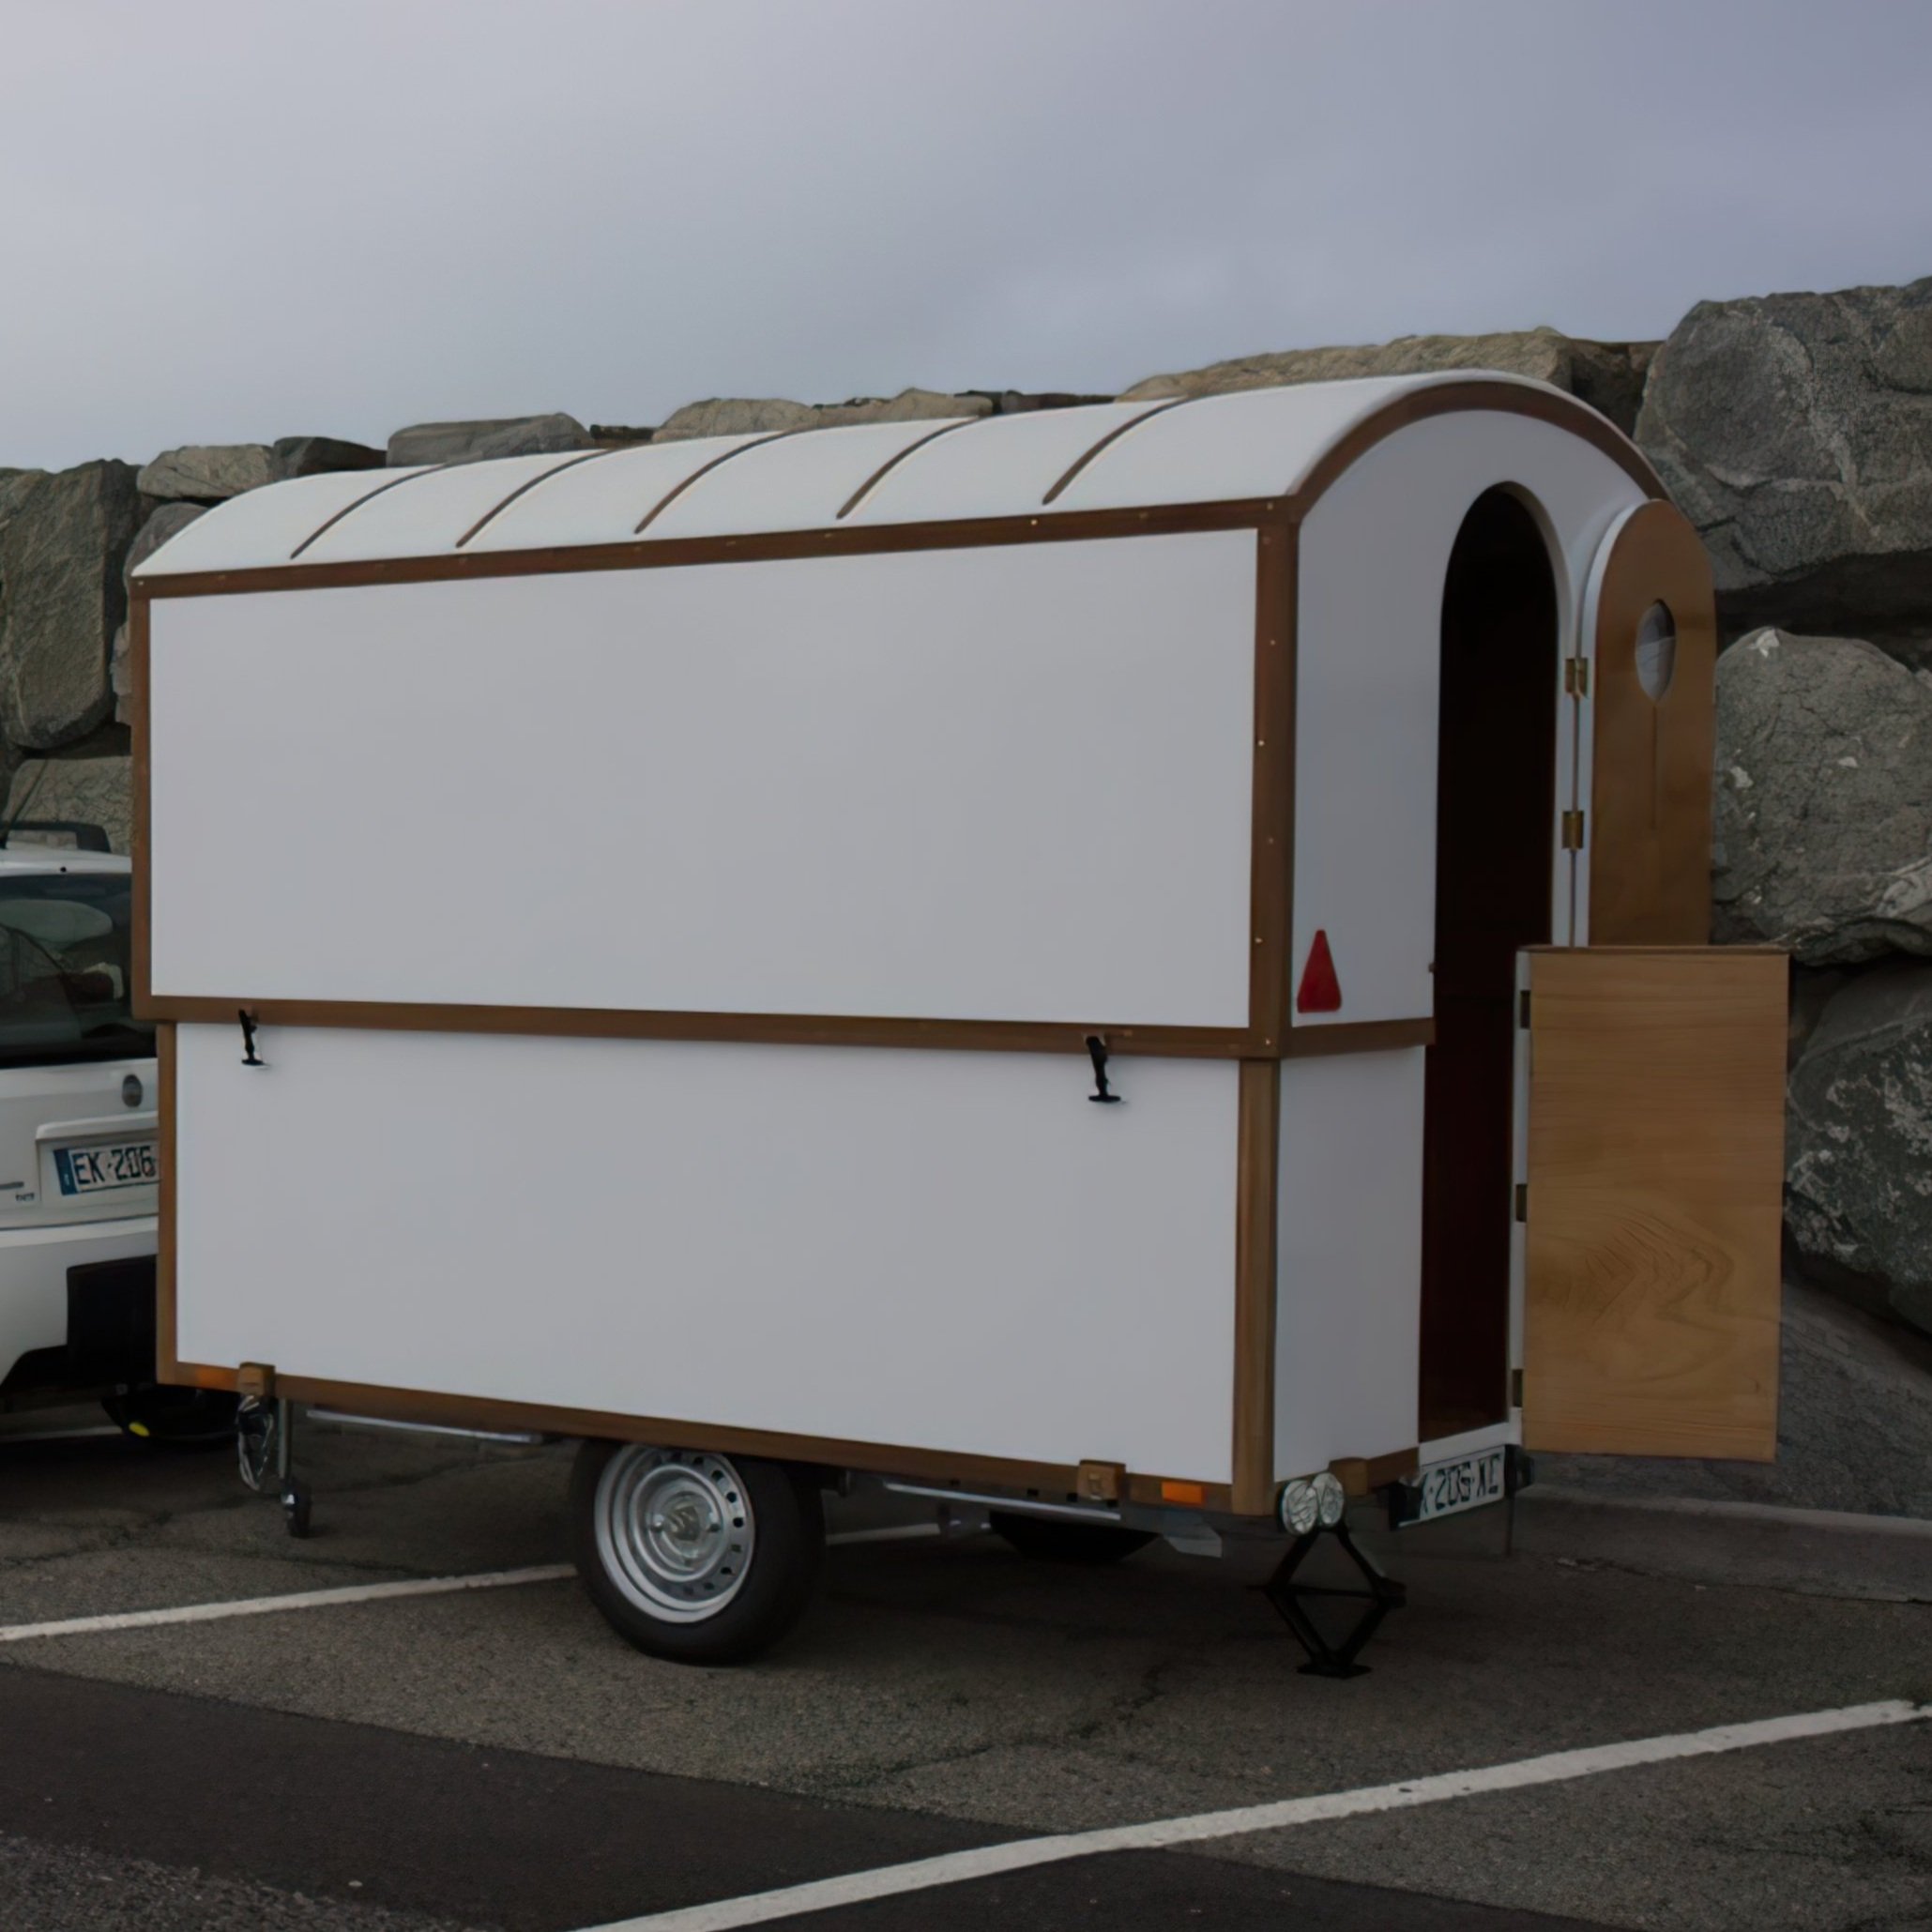  Think of them as the IKEA of the outdoor world with plans of everything from cabins to bikes to canoes and campers.  One such design is the Slidavan lightweight telescopic caravan. At only 660 pounds and ten and a half feet in length, this super lig